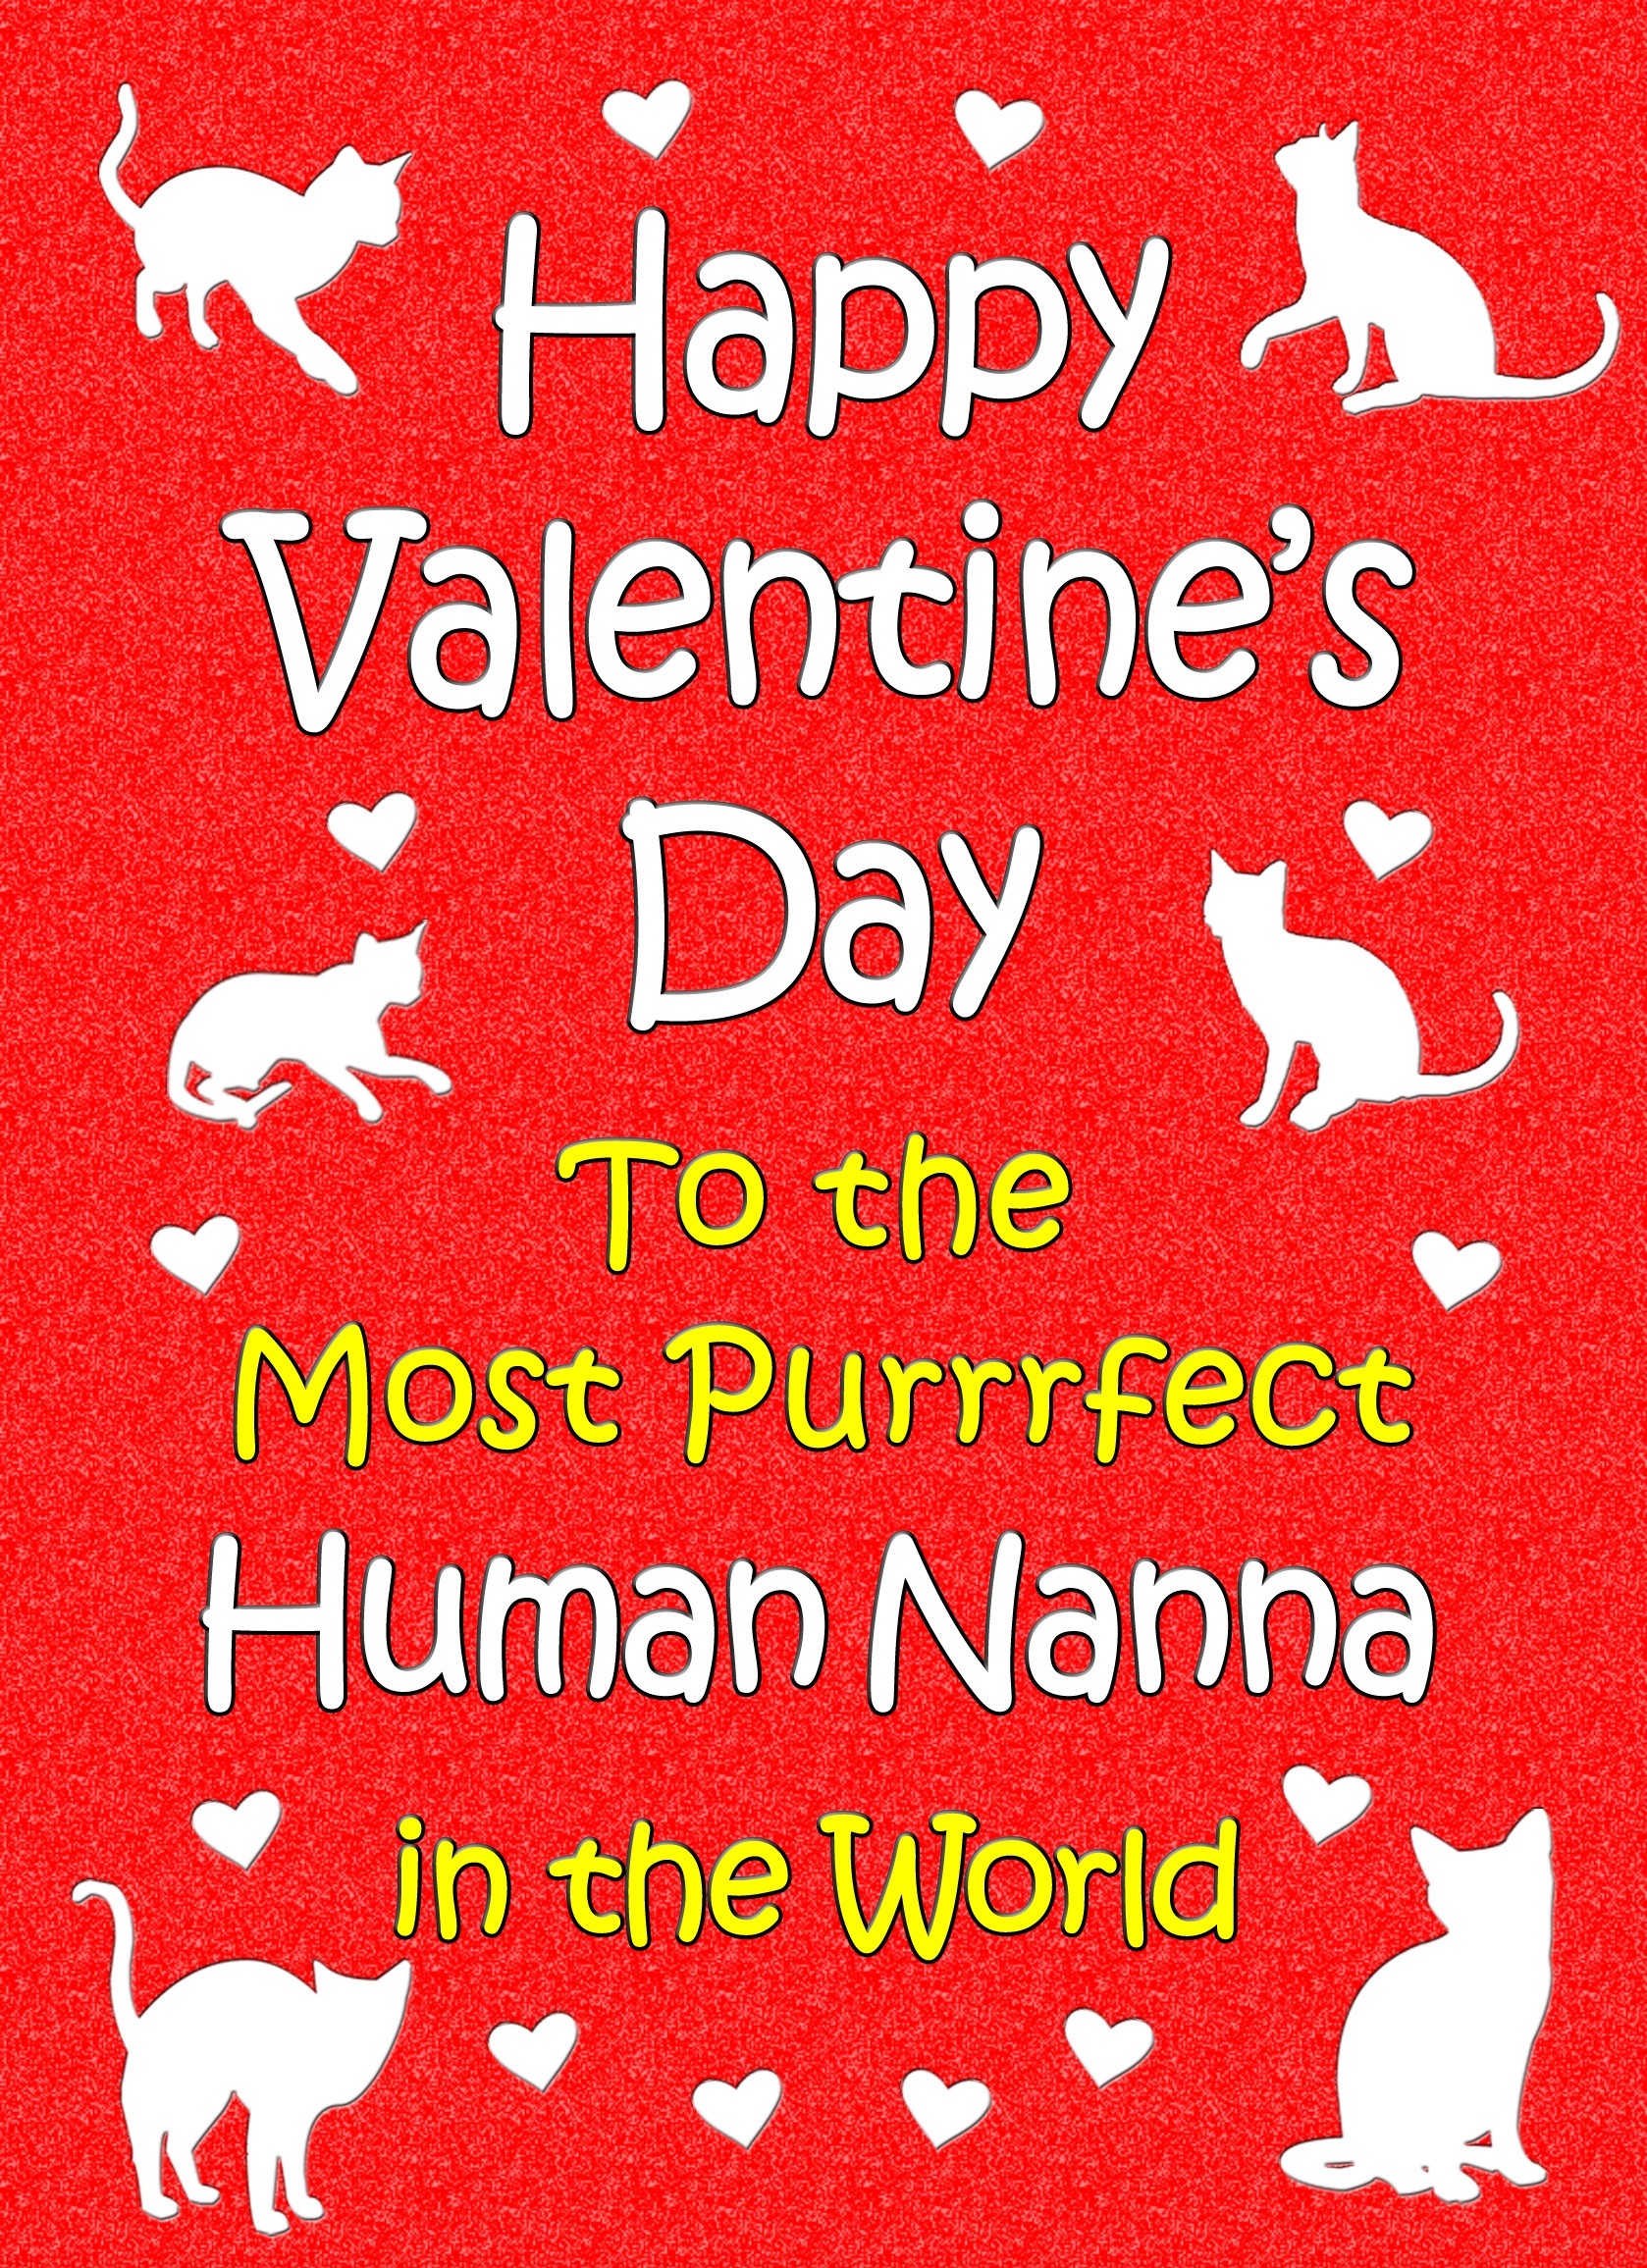 From The Cat Valentines Day Card (Human Nanna)